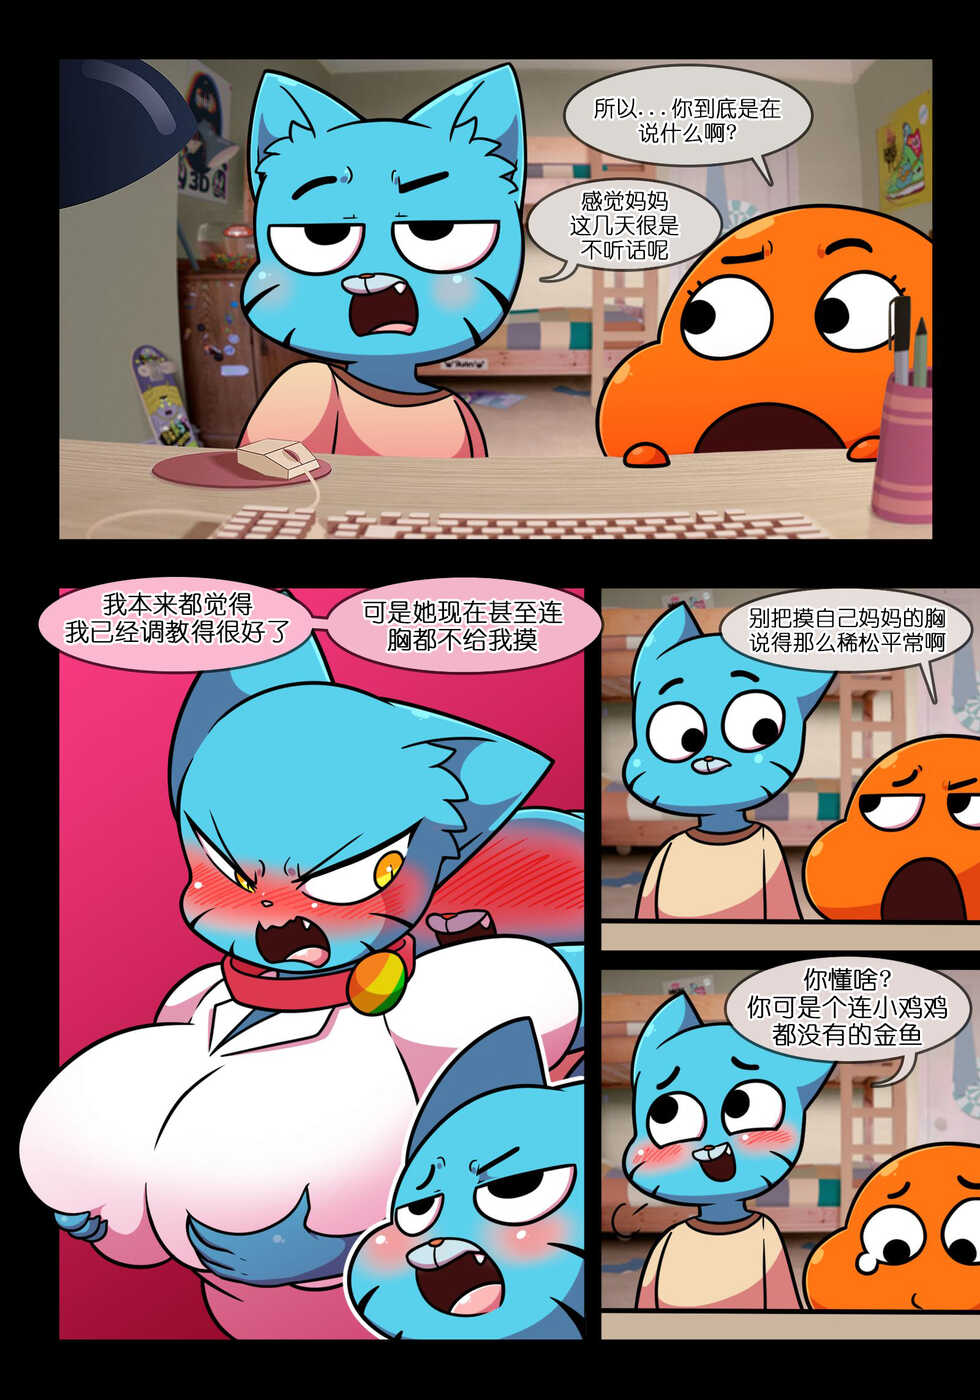 [Wherewolf] Lusty World of Nicole Ep. 3 - Controller [CN] - Page 3